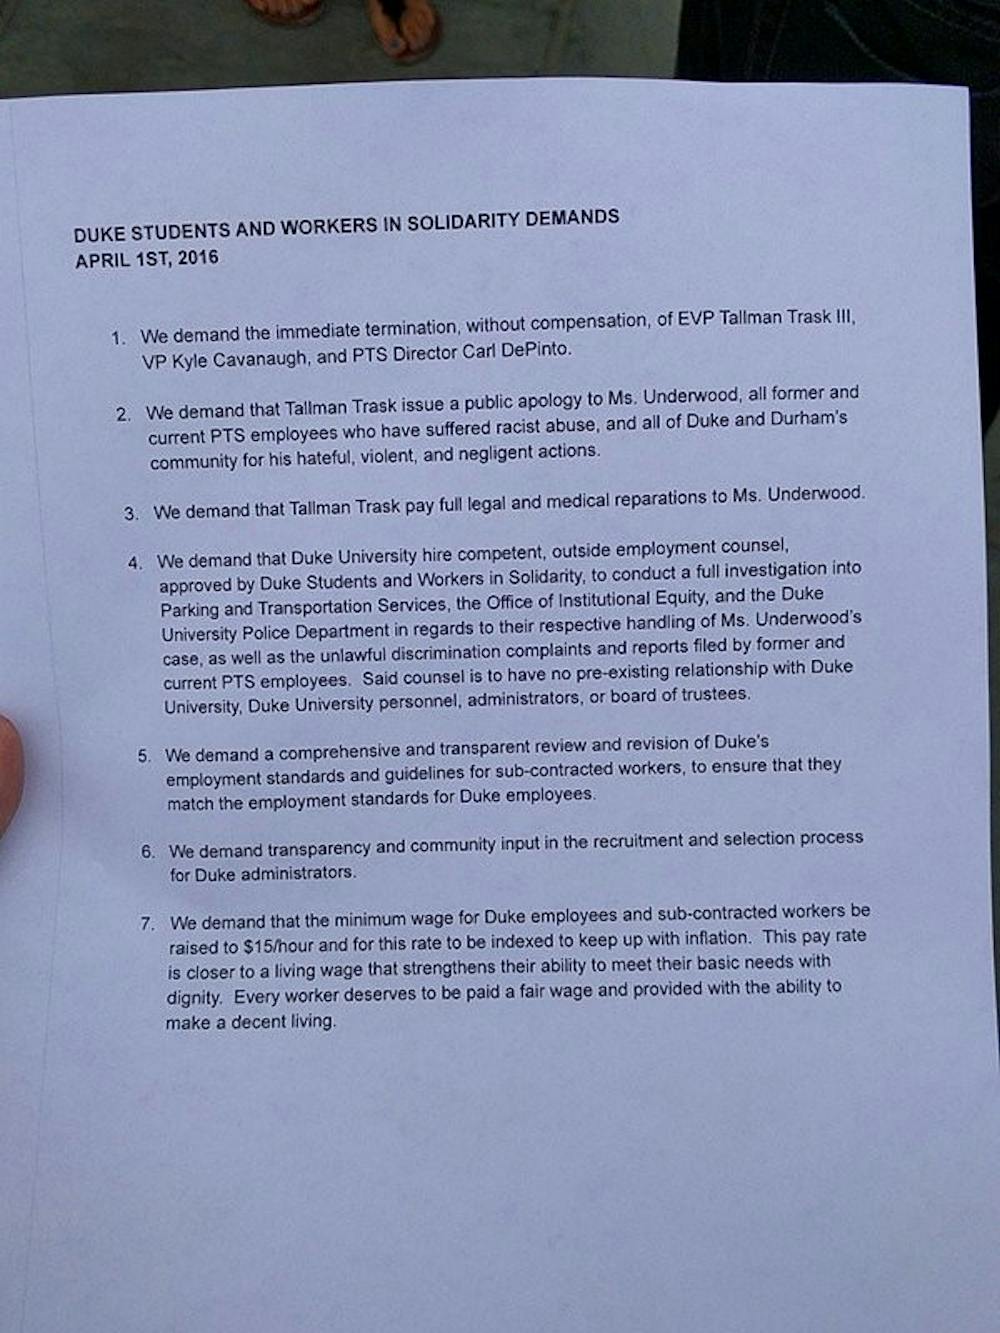 The full list of demands issued by students Friday that protestors say must be met before students leave the Allen Building.